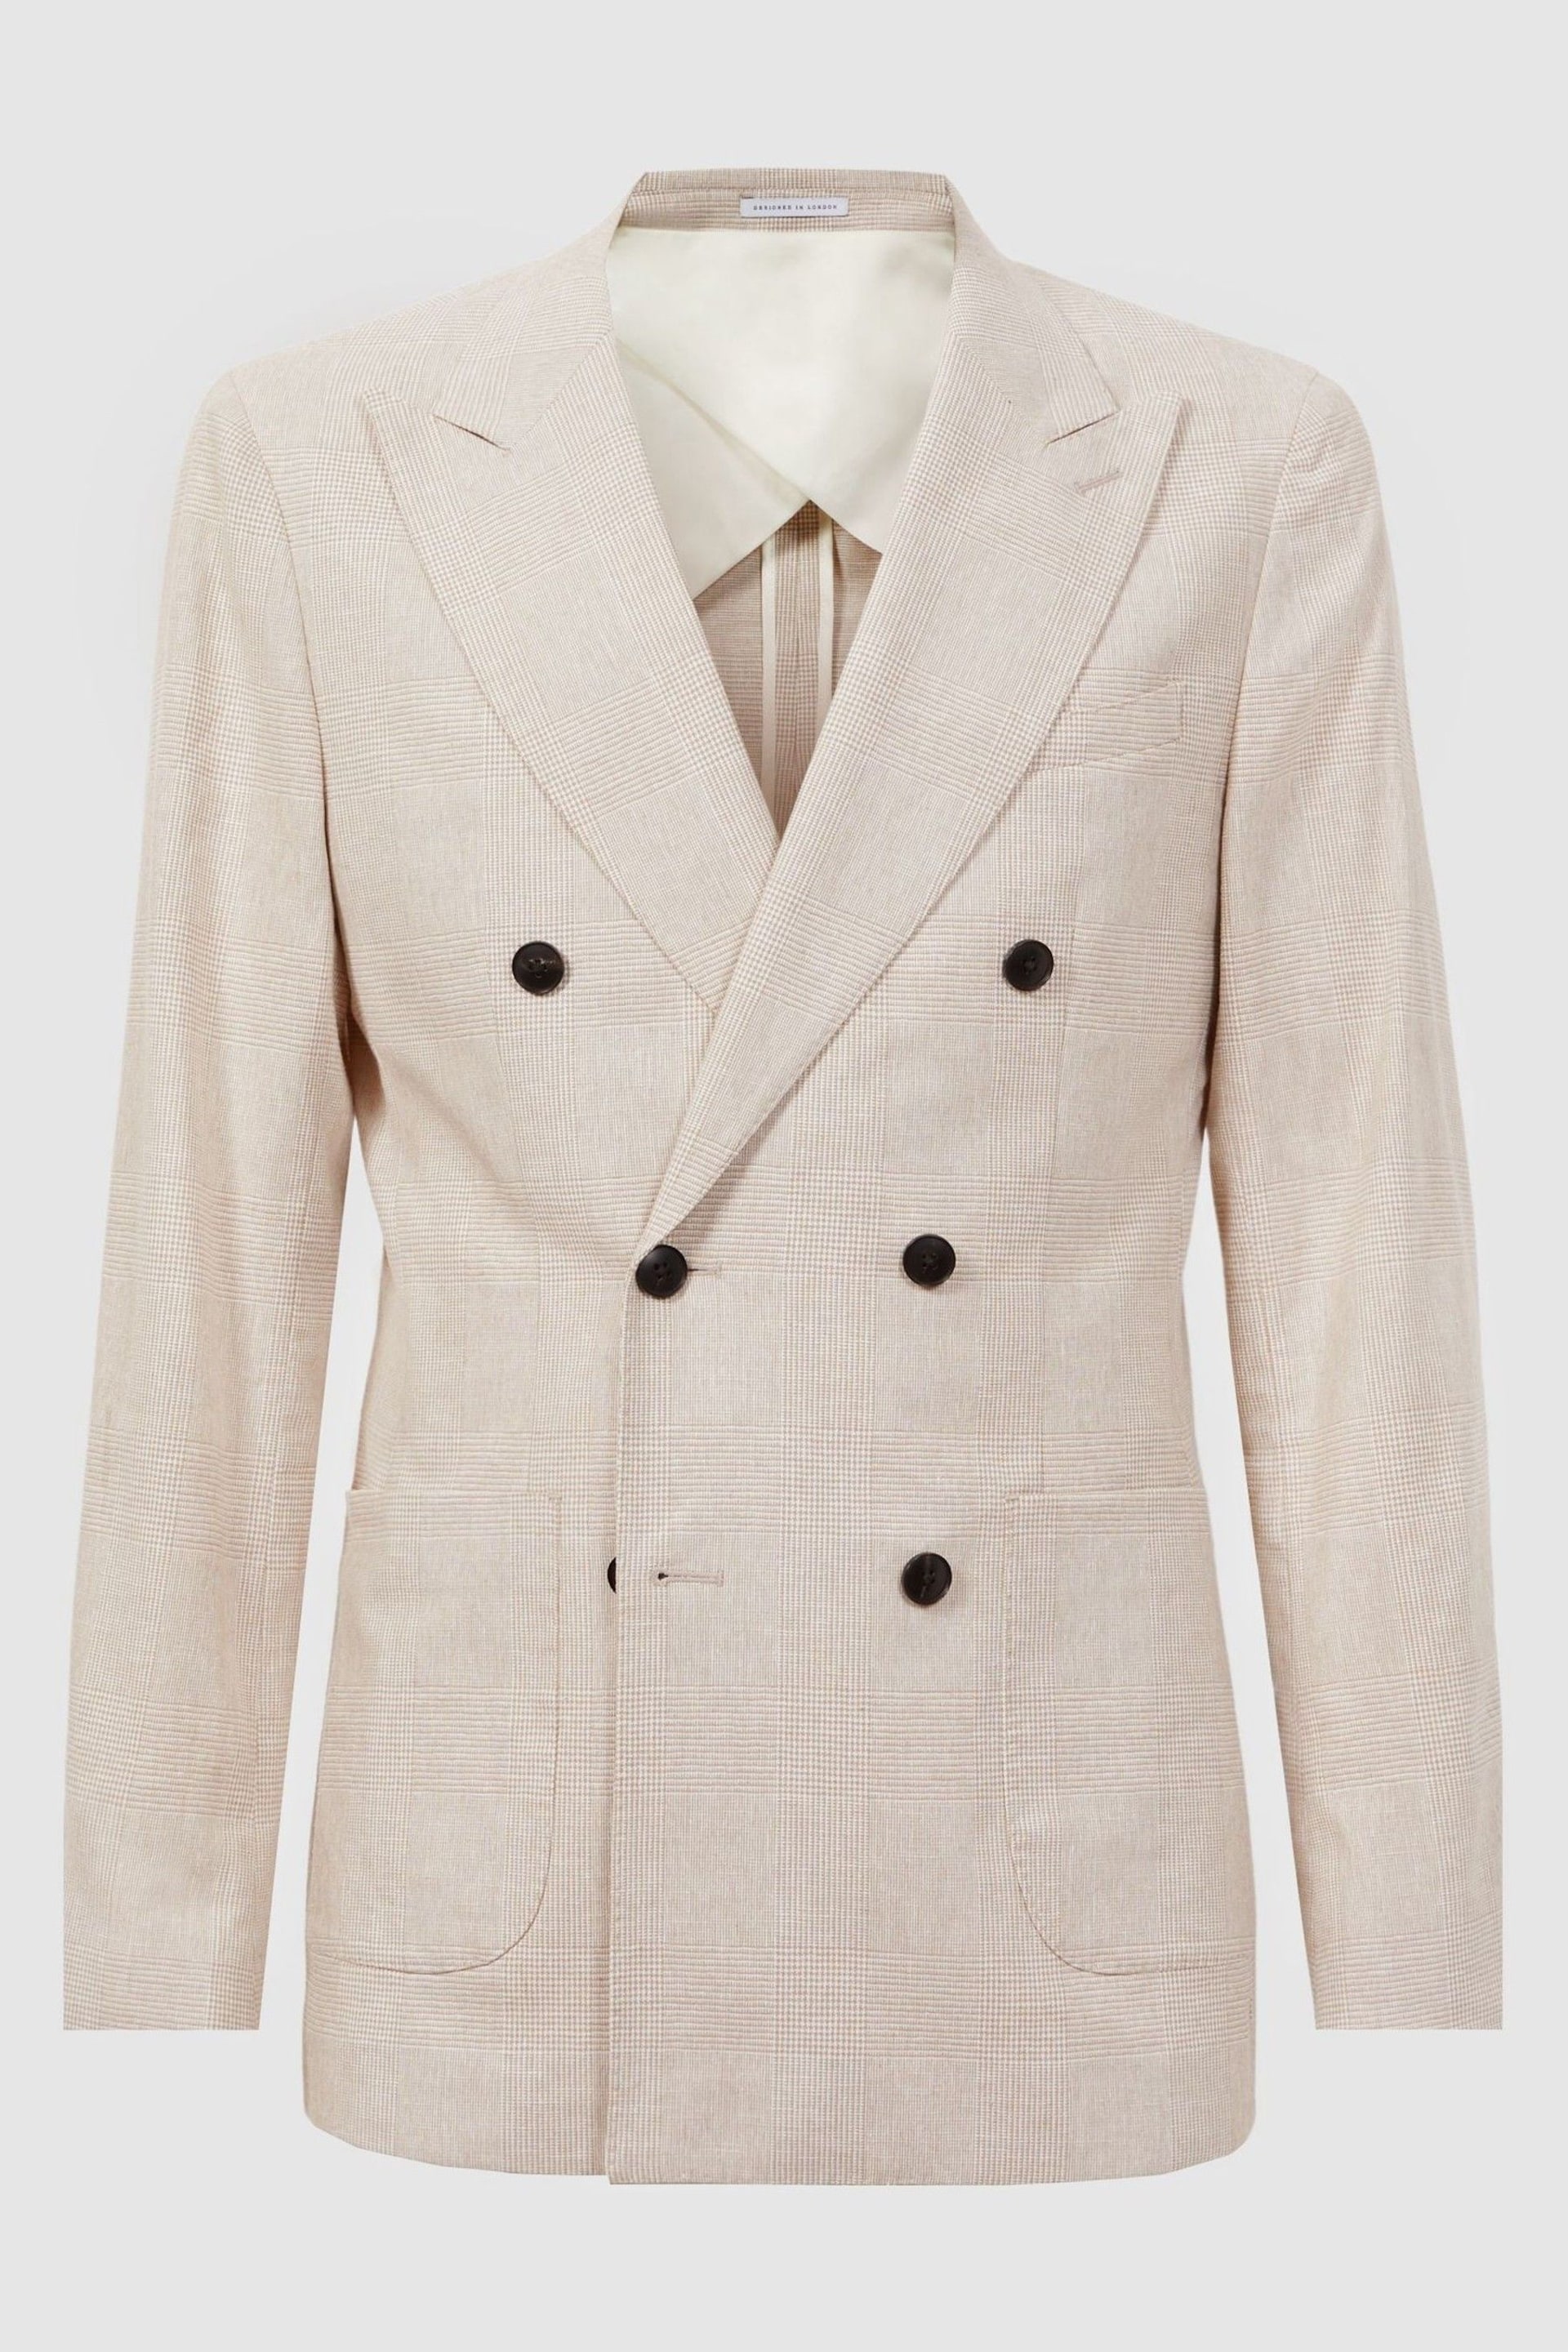 Reiss Oatmeal Craft Double Breasted Cotton-Linen Check Blazer - Image 2 of 6